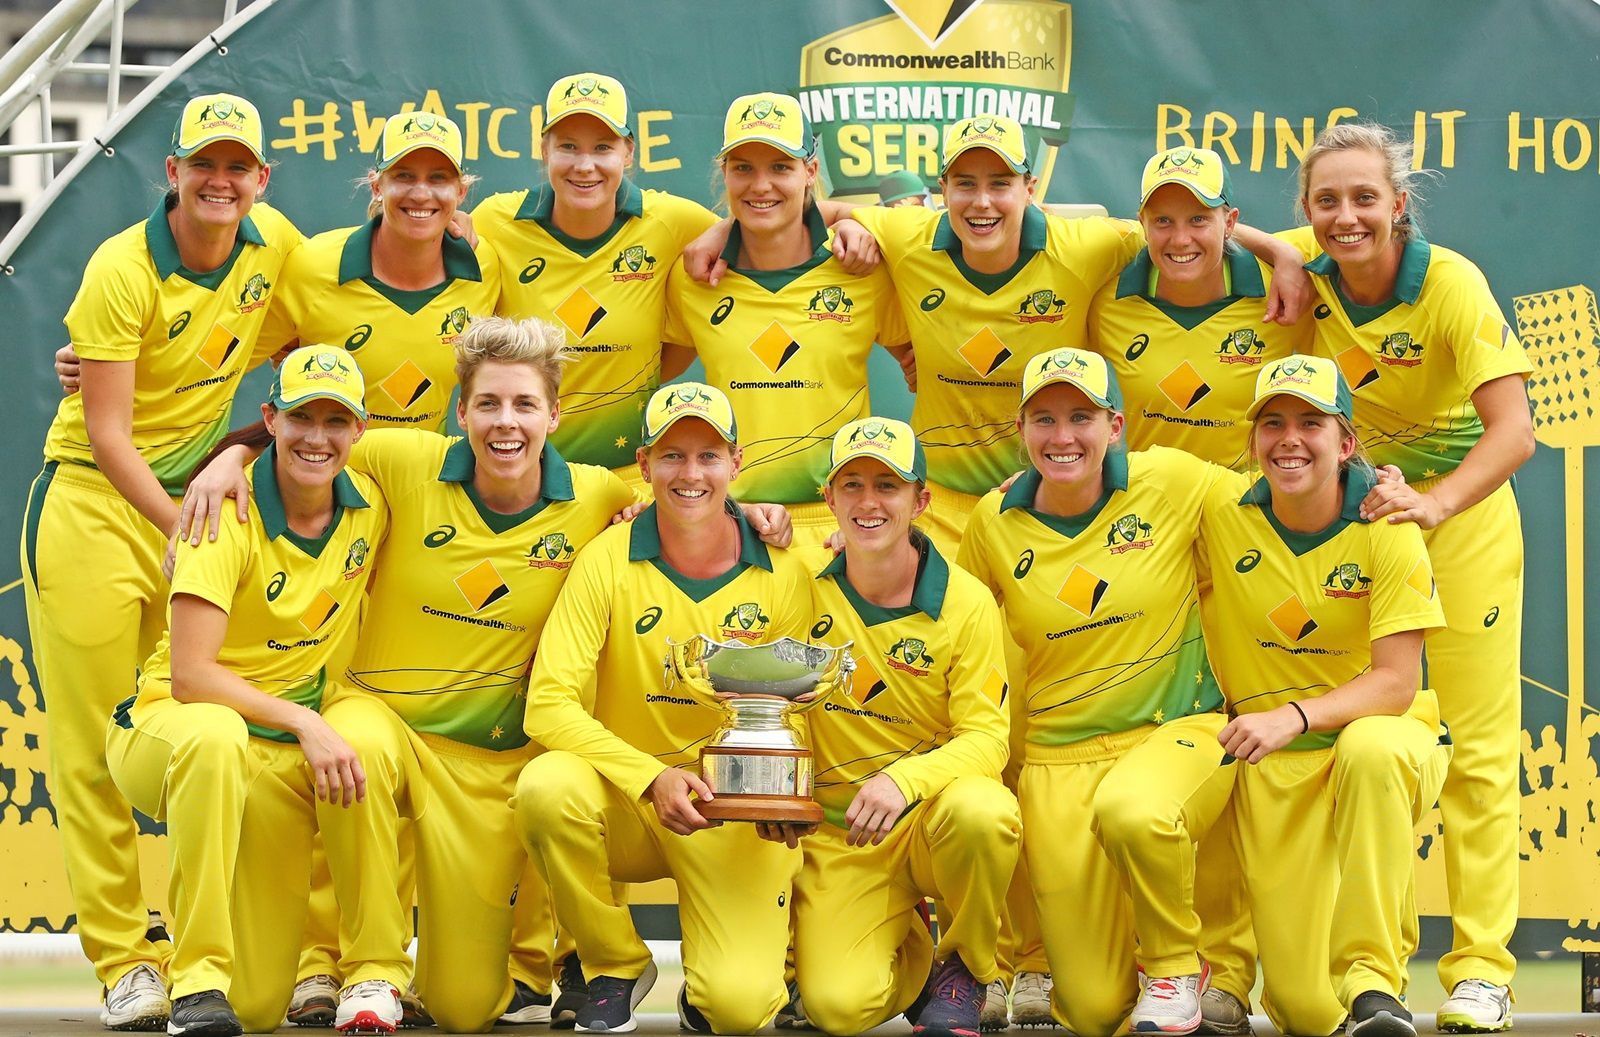 Australia are a six times World Cup Champion